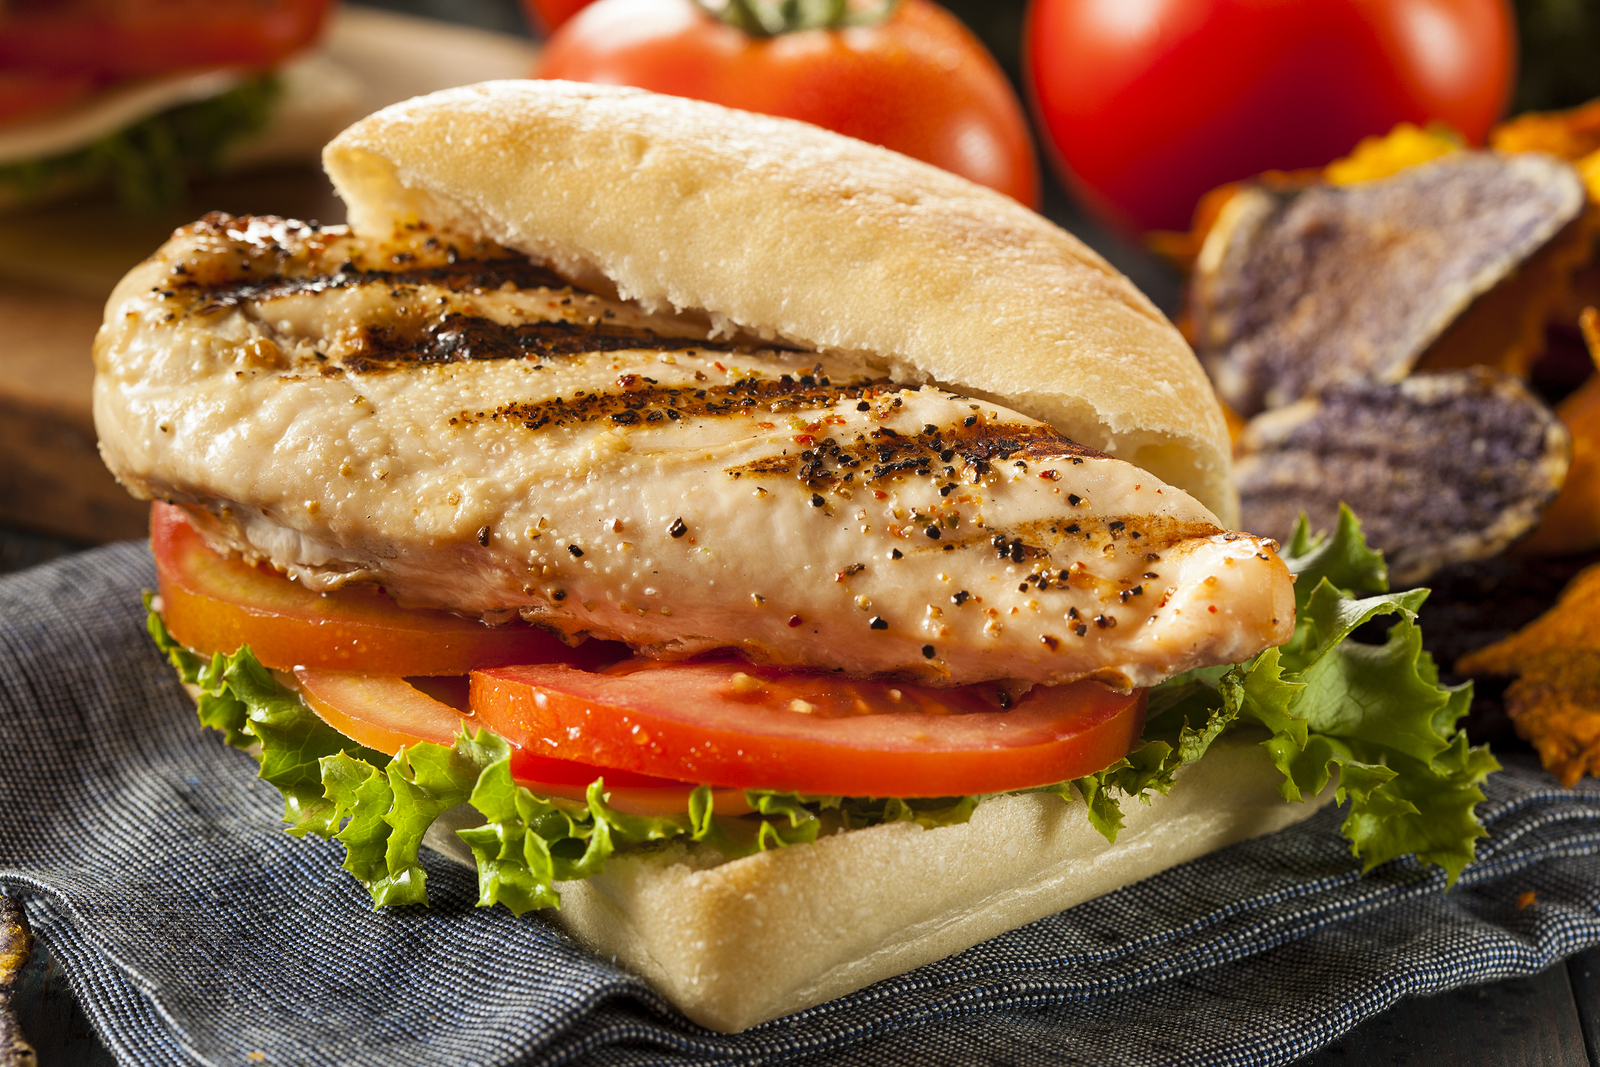 Grilled chicken sub sandwich pre-workout meal